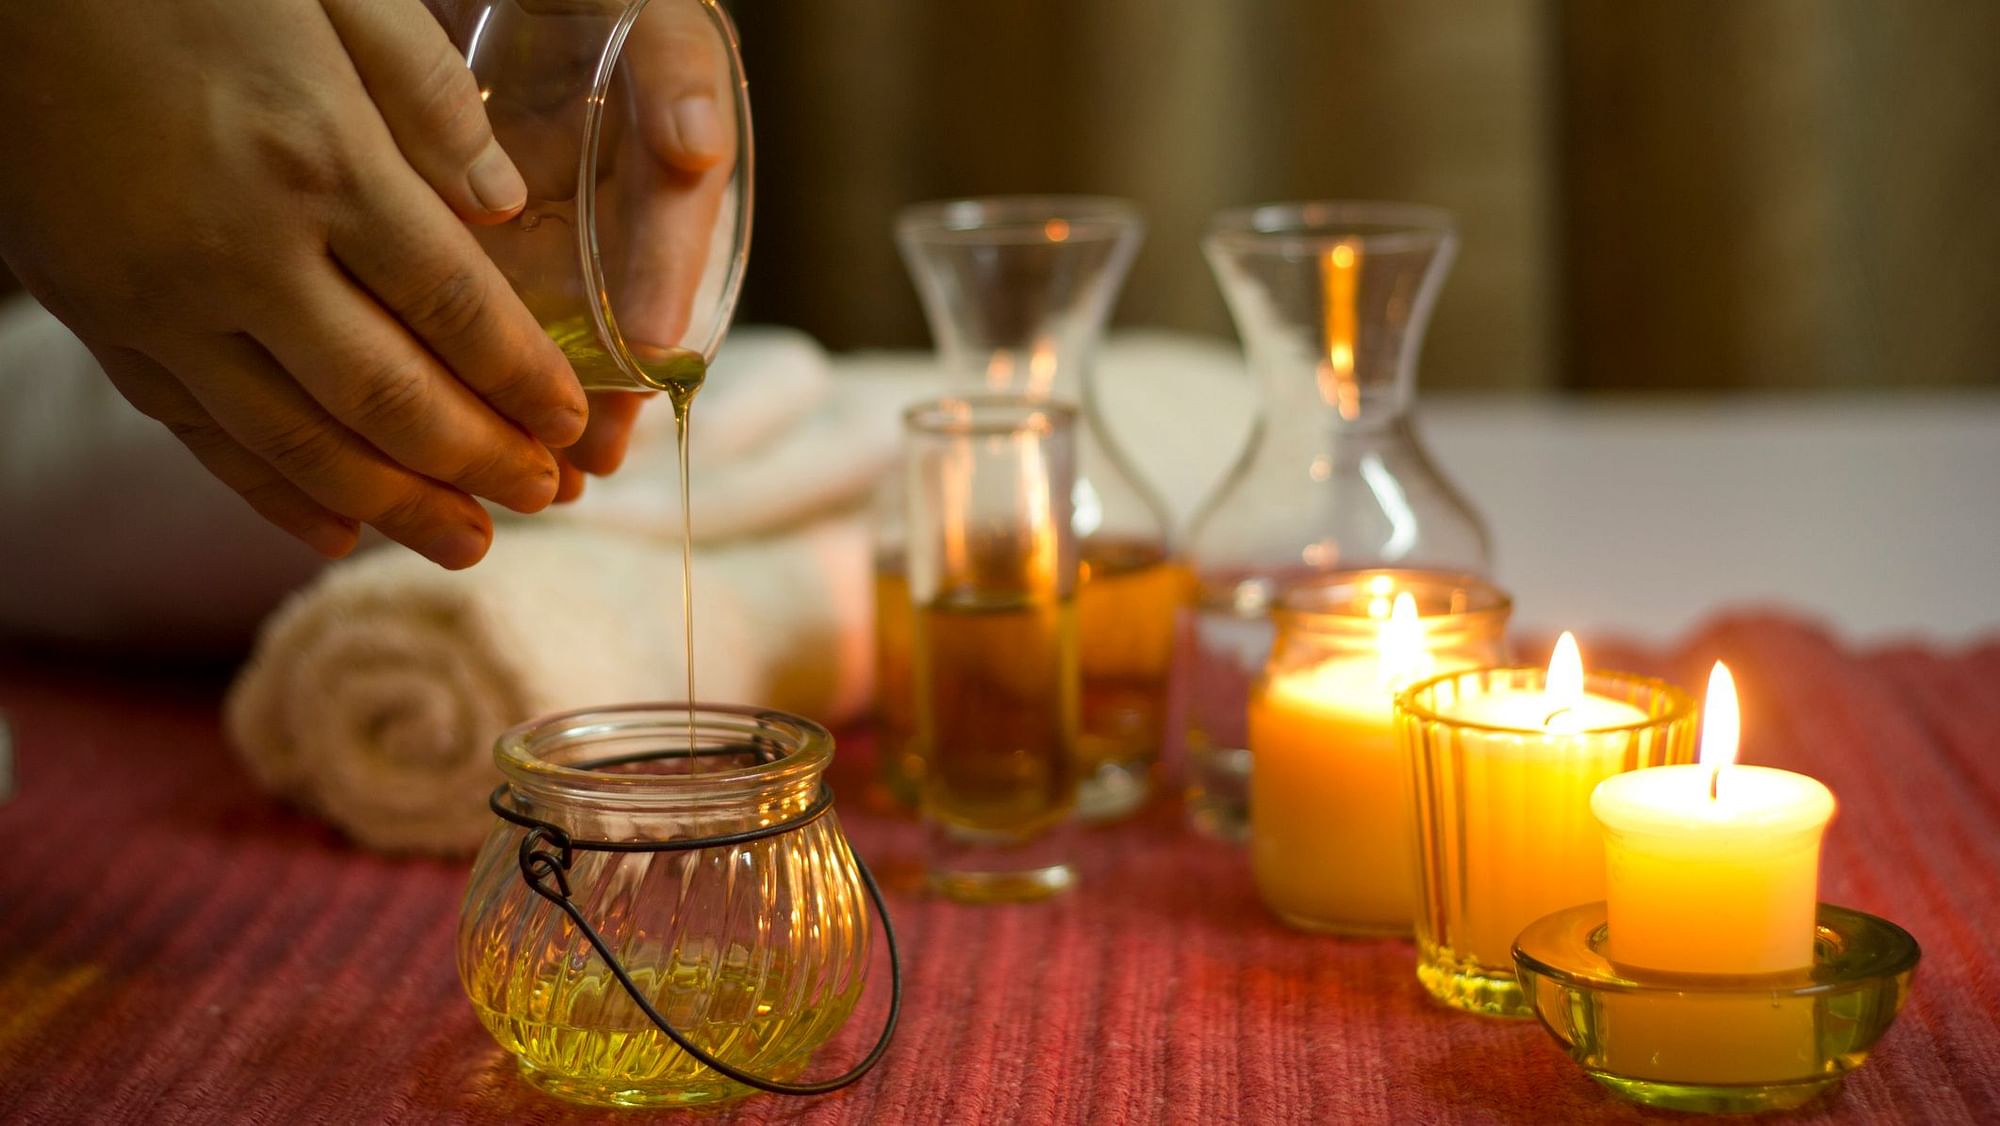 5 Ayurvedic Remedies for Stress, Anxiety: These Ayurvedic remedies can help relieve stress and anxiety.